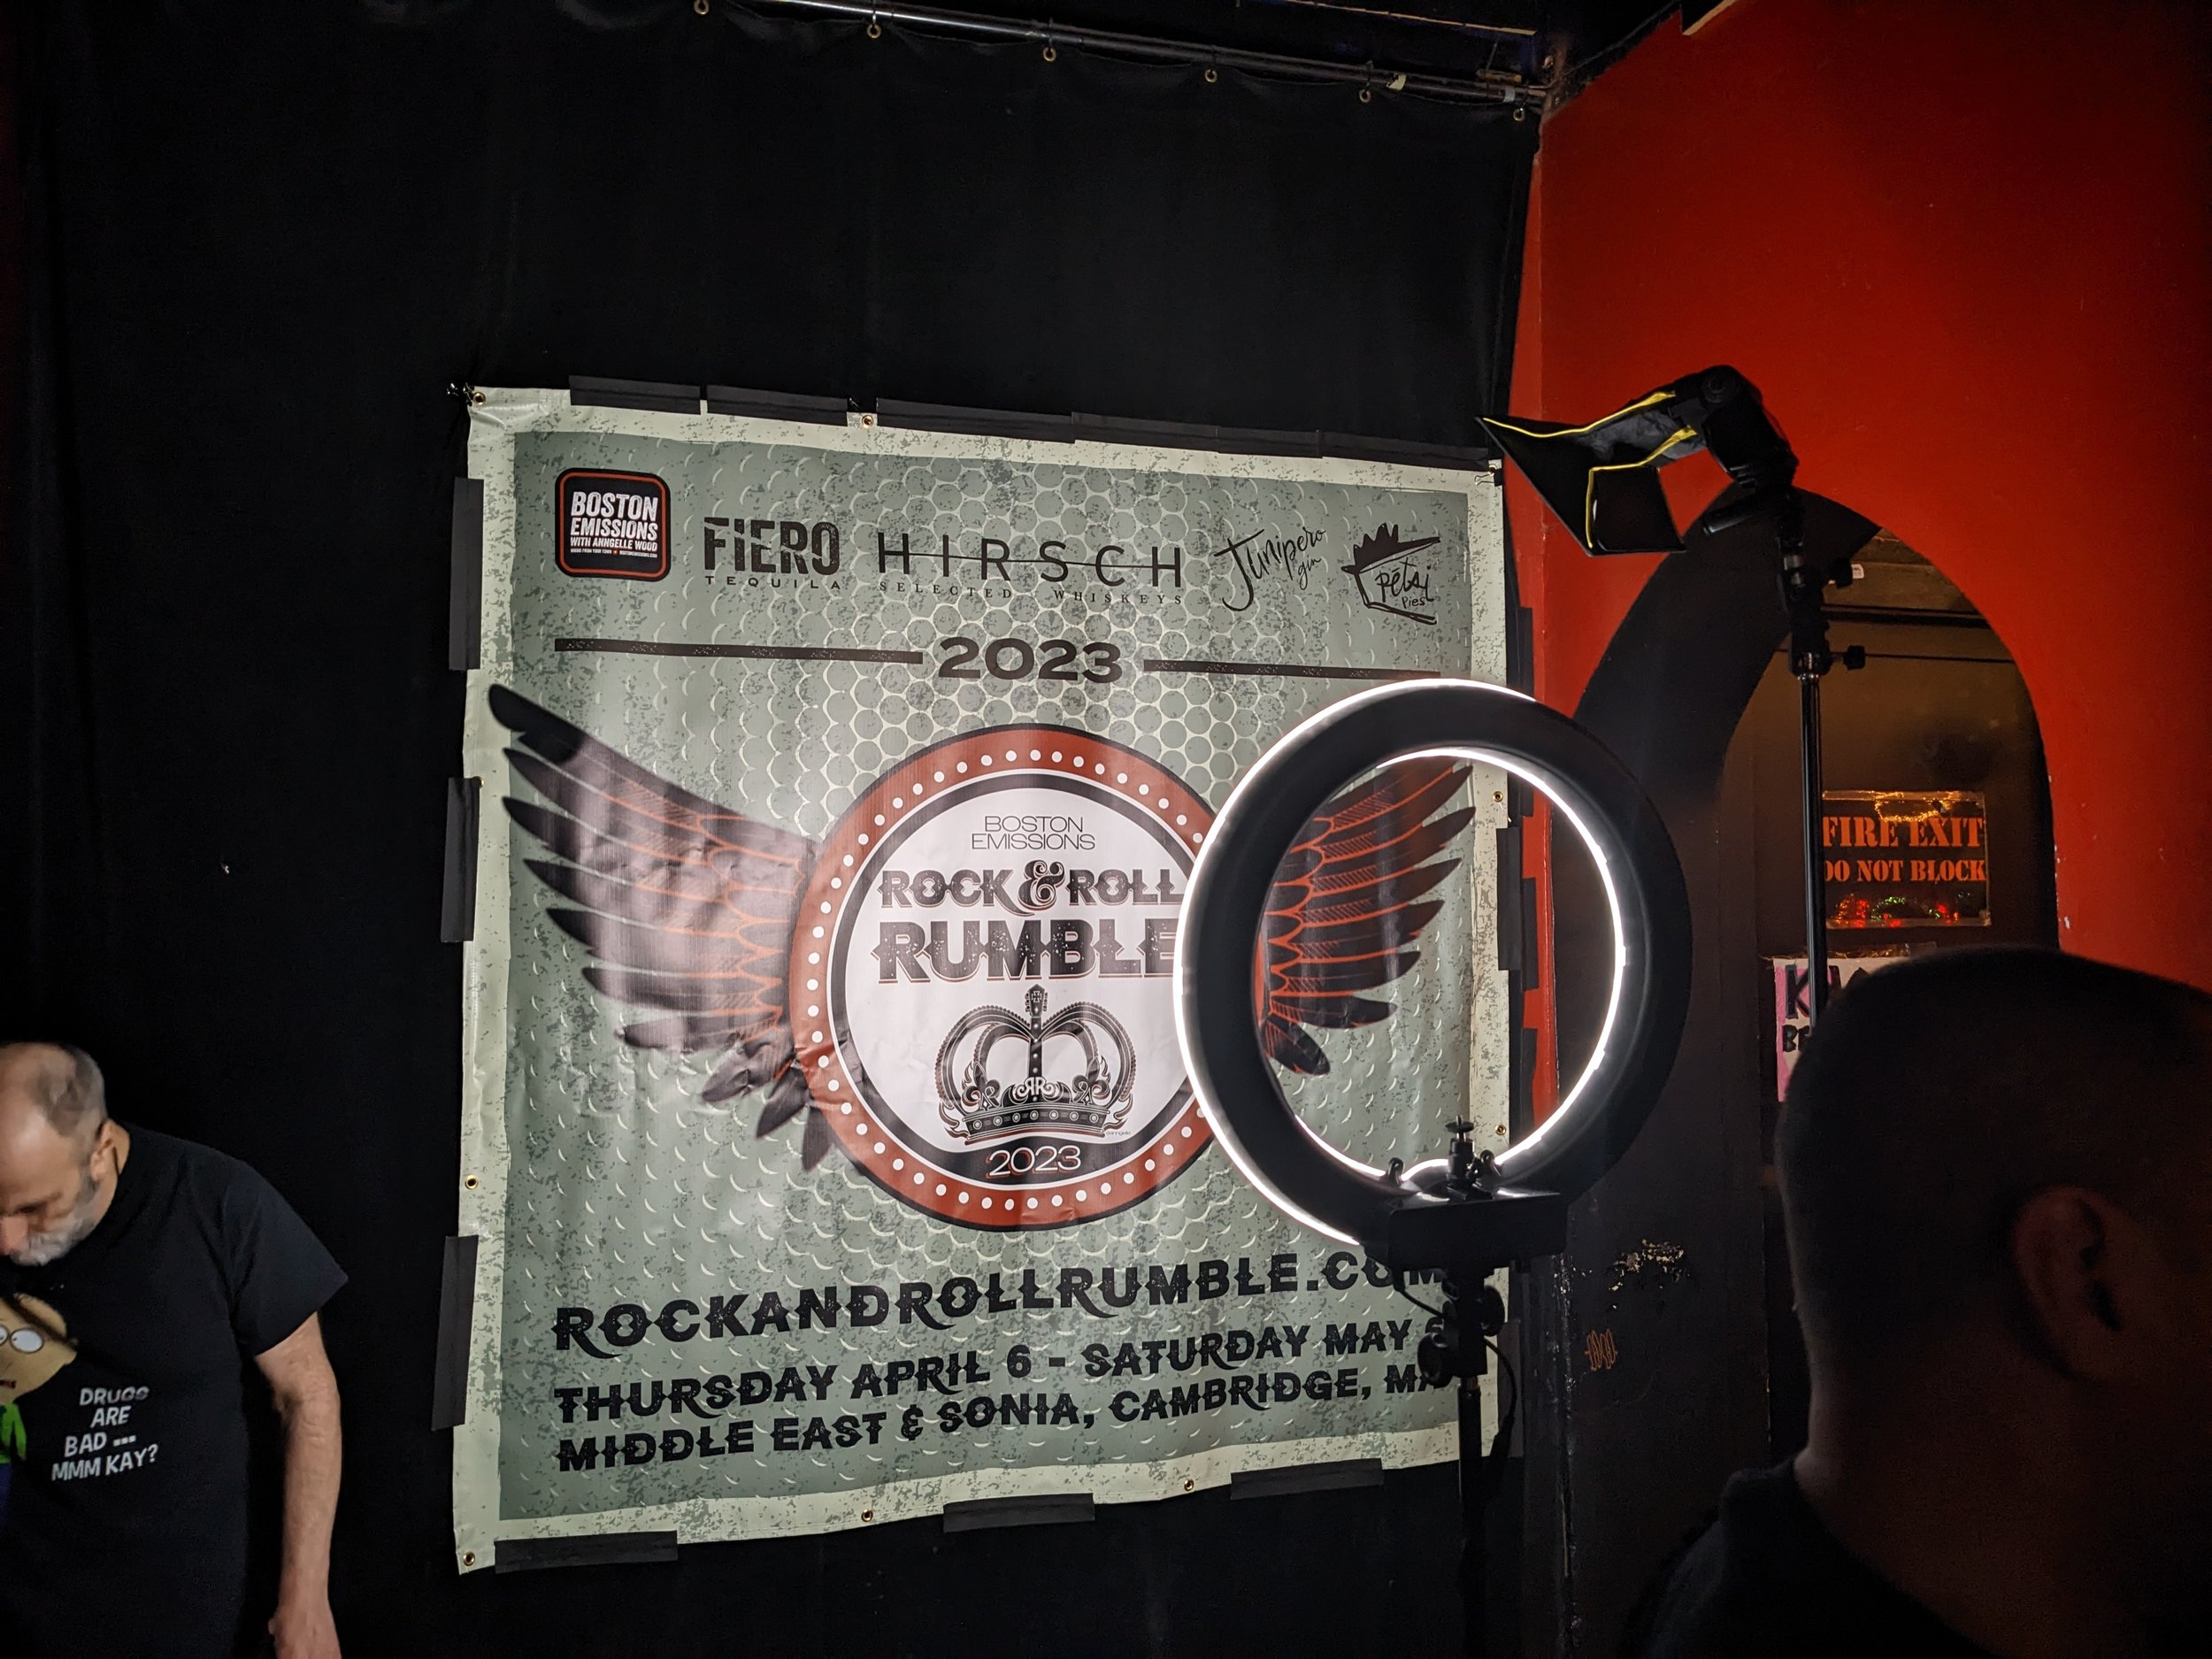 230413-live-review-middle-east-rock-n-roll-rumble-the-freqs-the-endorphins-tysk-tysk-task.jpg